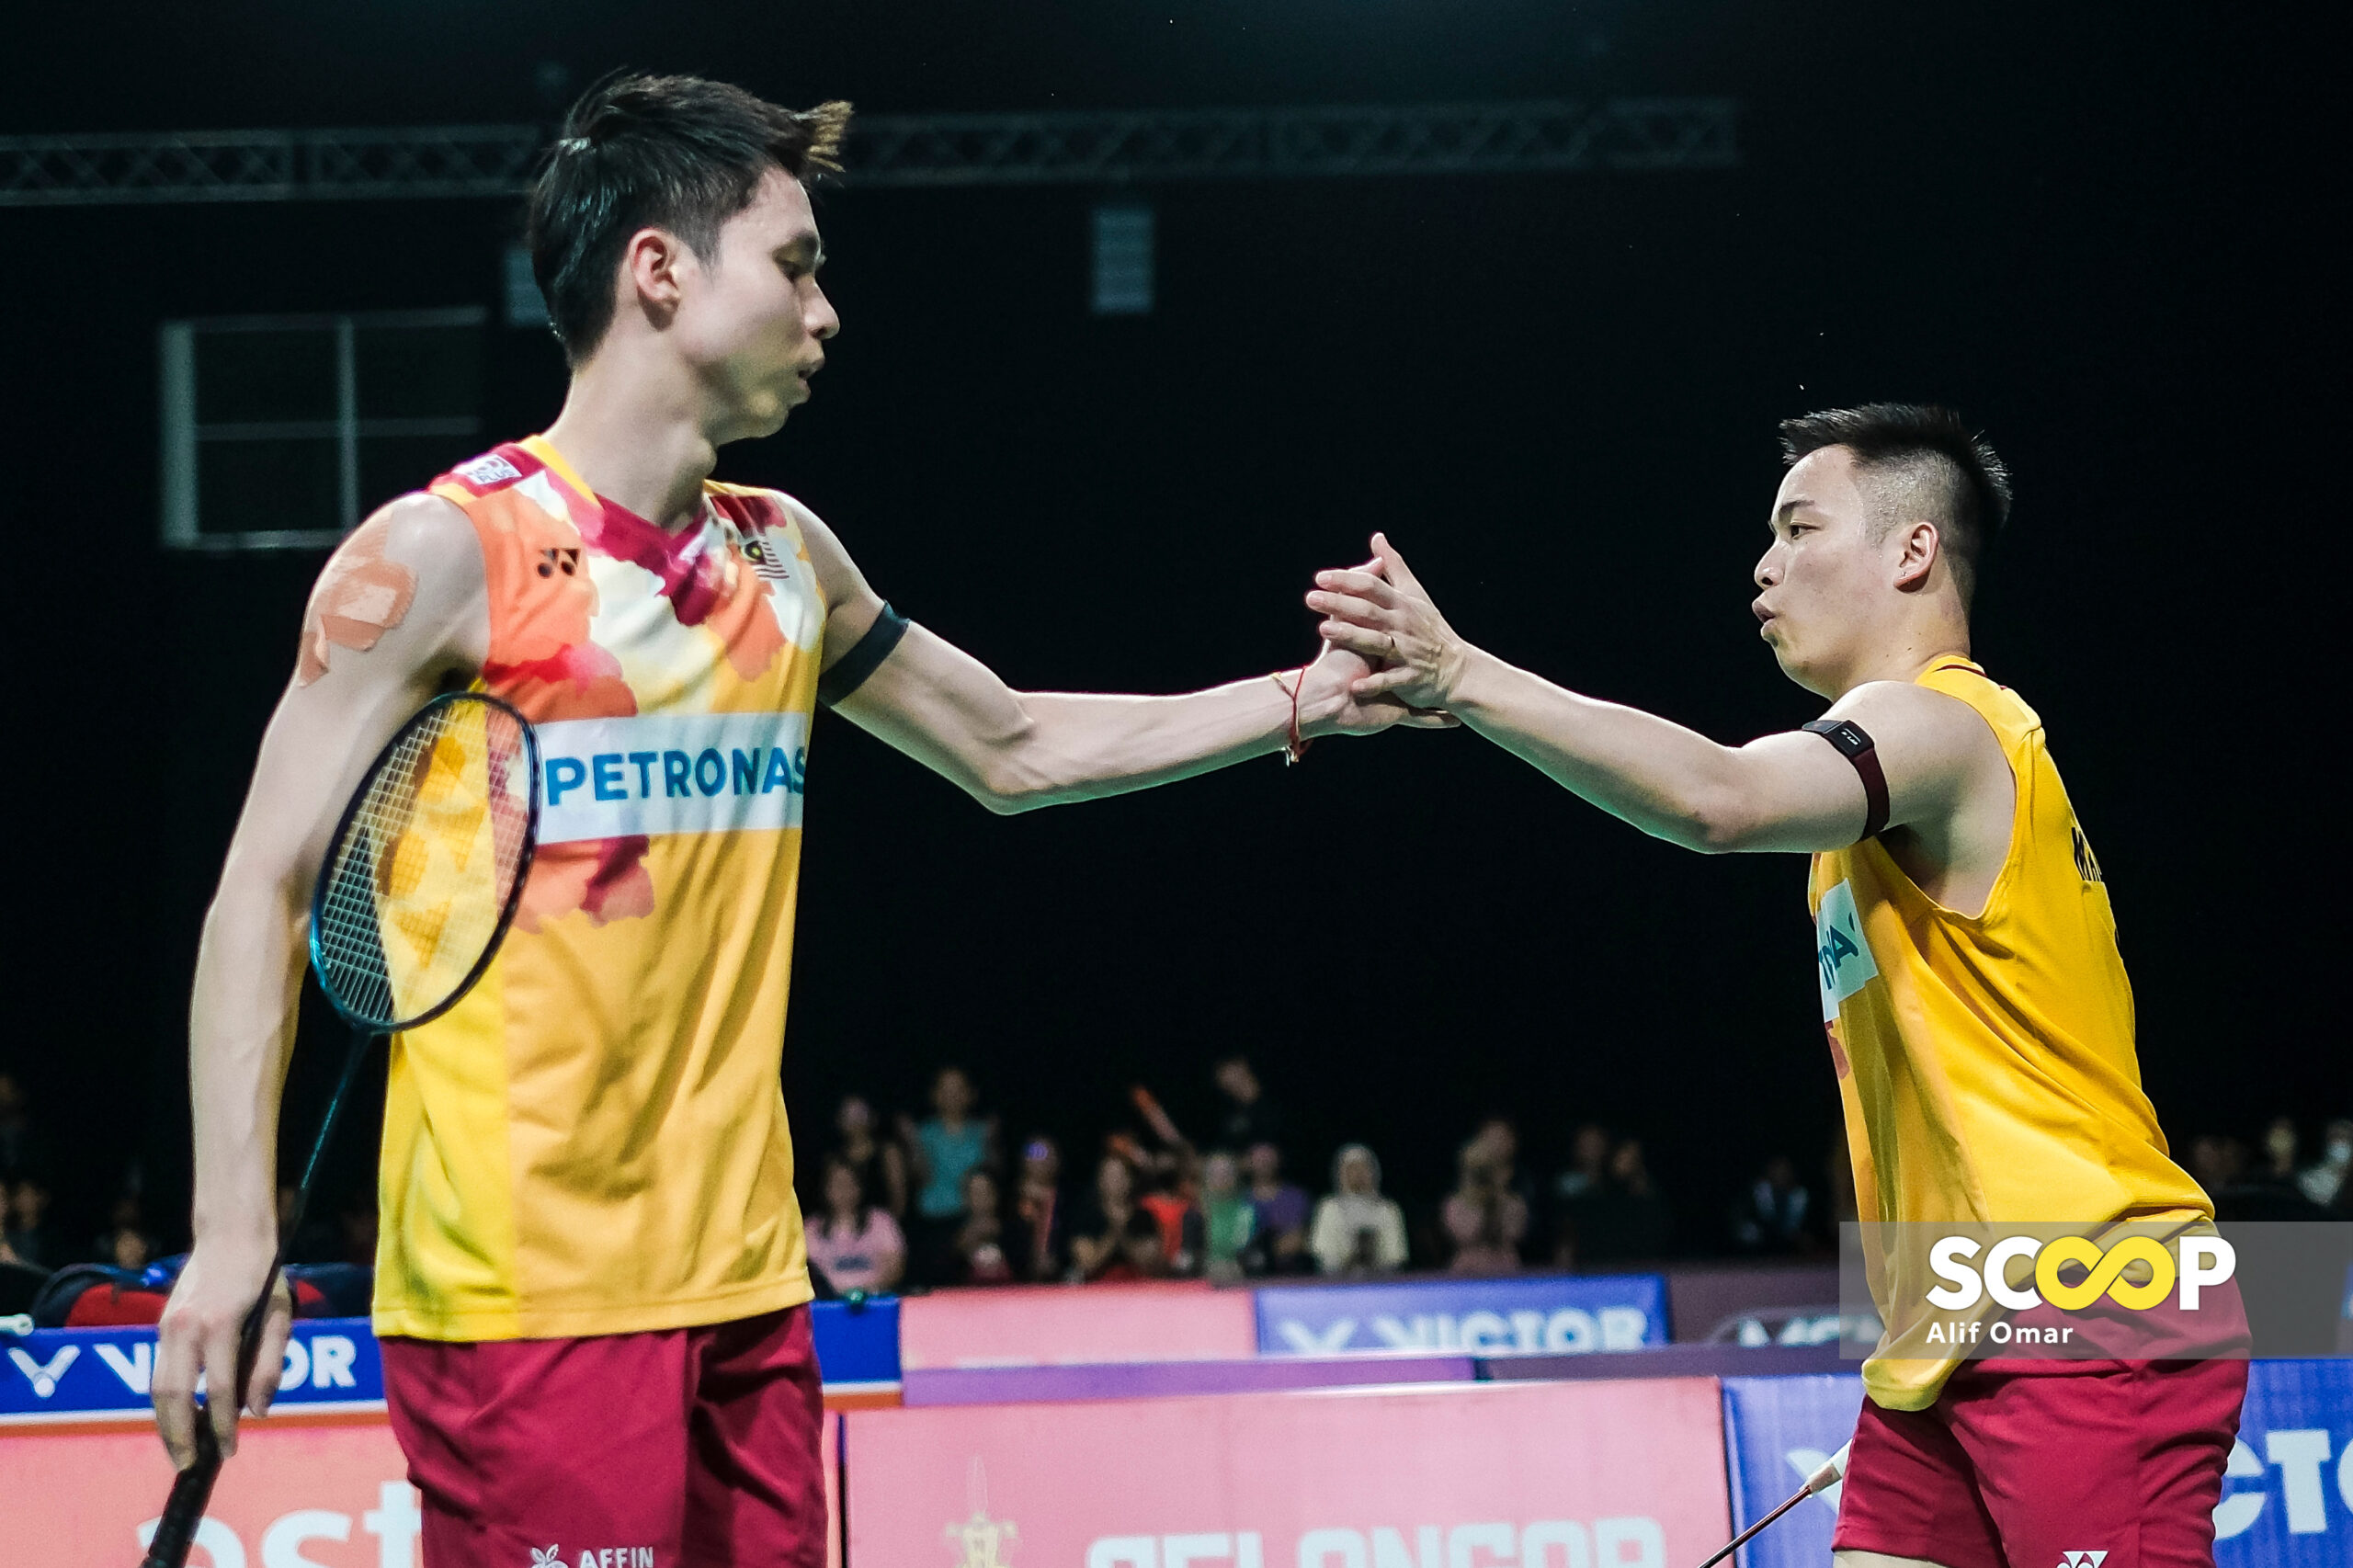 All England: Aaron-Wooi Yik aim to create another memorable moment for Malaysia